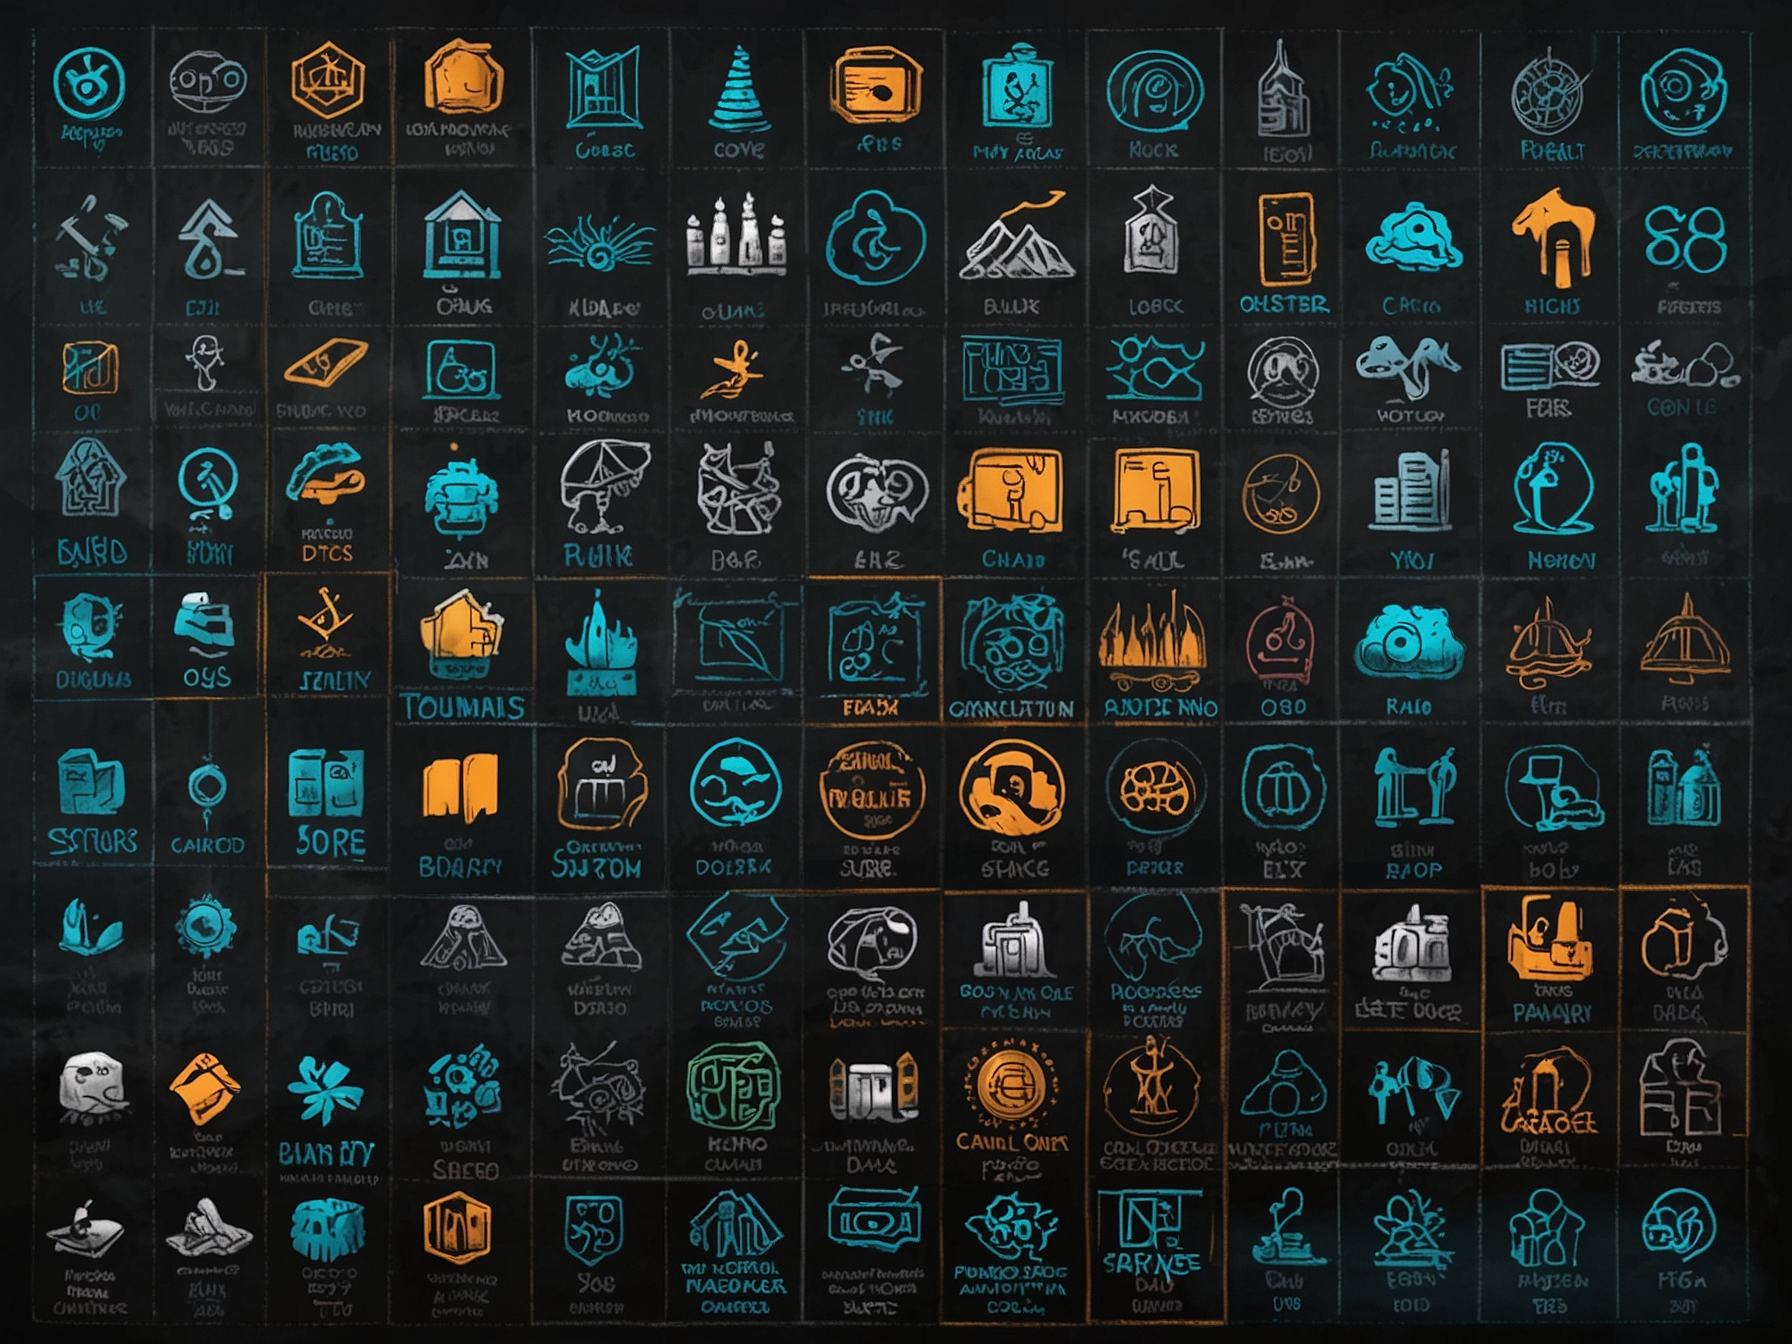 An image showing various sector icons, highlighting the diverse industries within the S&P 500 and emphasizing the need for investors to consider sector-specific risks in their portfolios.